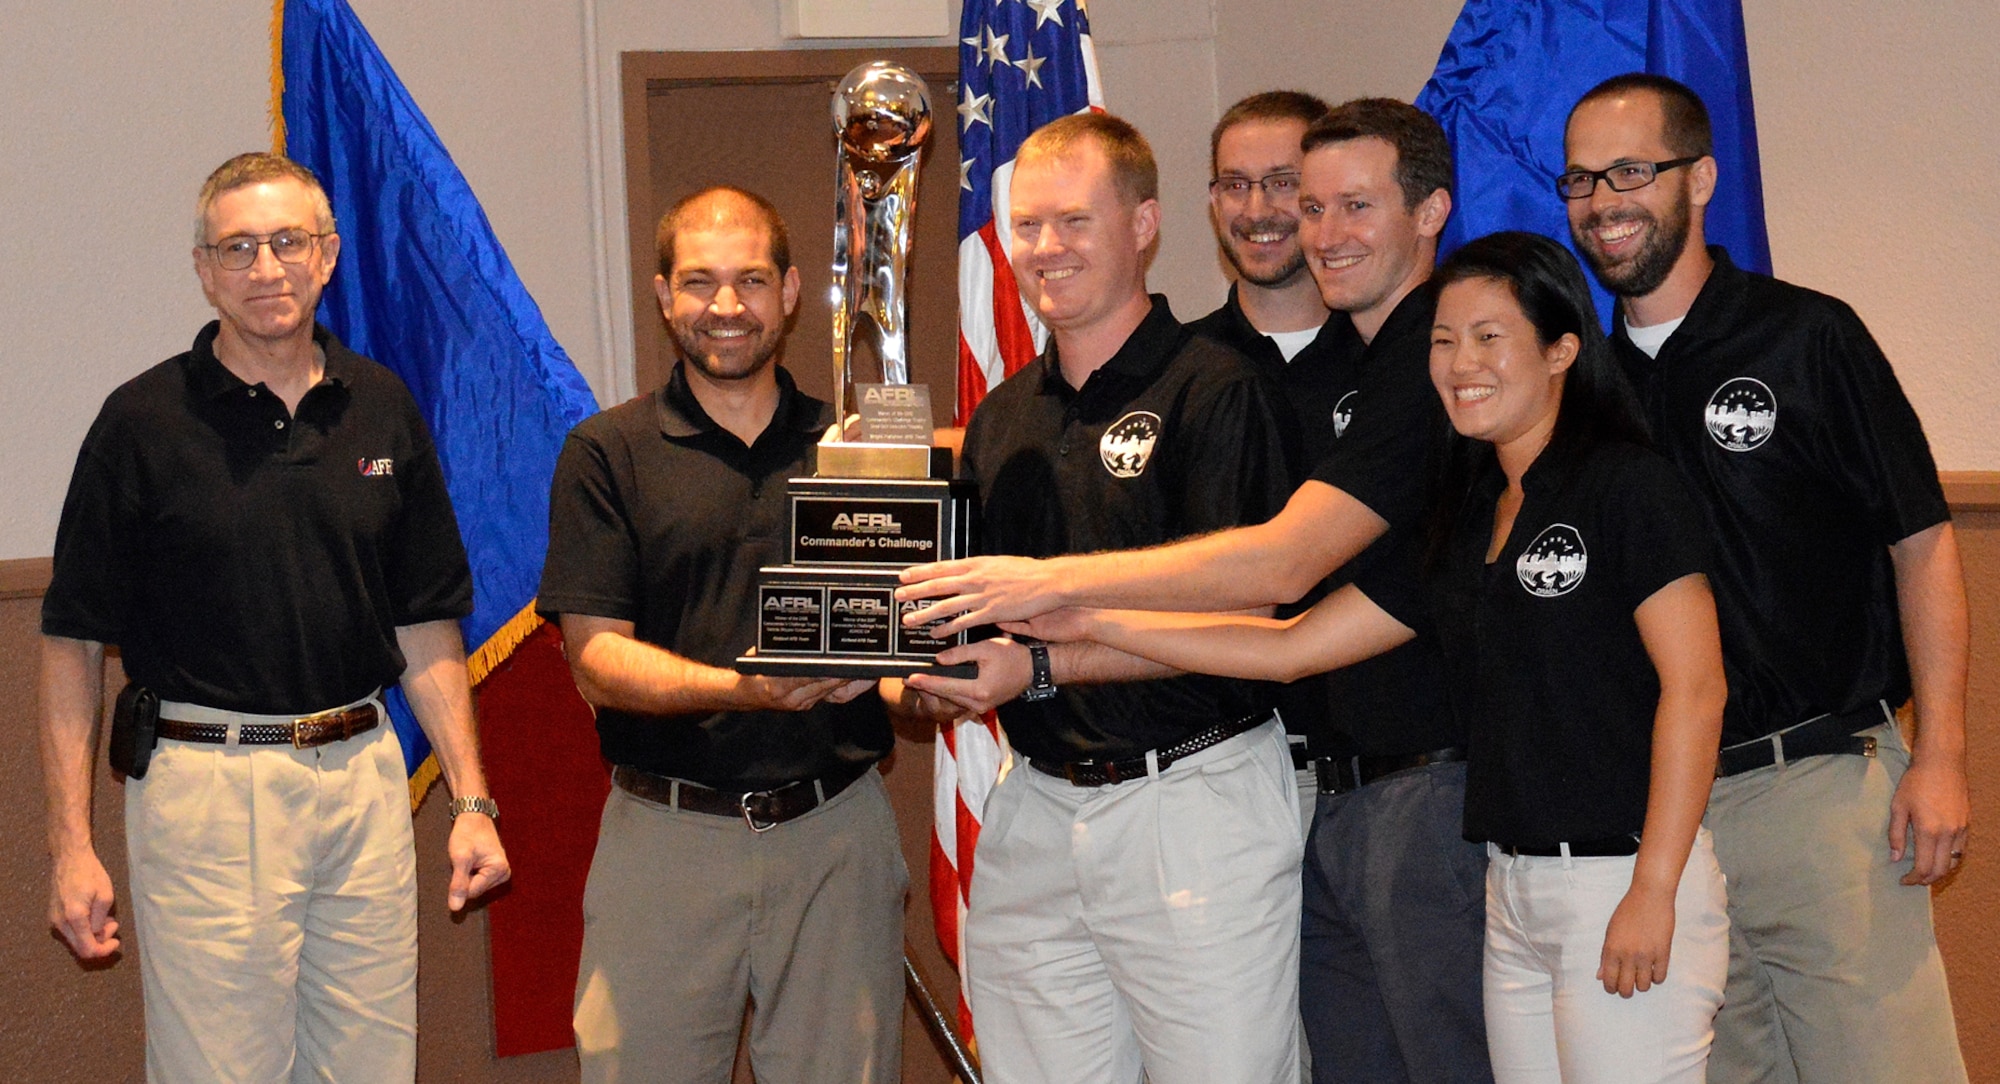 The Commander’s Challenge team from Air Force Materiel Command accepts the first place travelling winning trophy from Maj. Gen. William McCasland, left, Air Force Research Laboratory commander. Team members, from left, are Daniel Gallagher, 1st Lt. Joshua Thomas, James Brewer, Adam Tuxbury, Joann Luu and Robert Merrill. Luu, from the 519th Software Maintenance Squadron at Hill AFB, Utah, was the team’s software lead. (Courtesy photo)